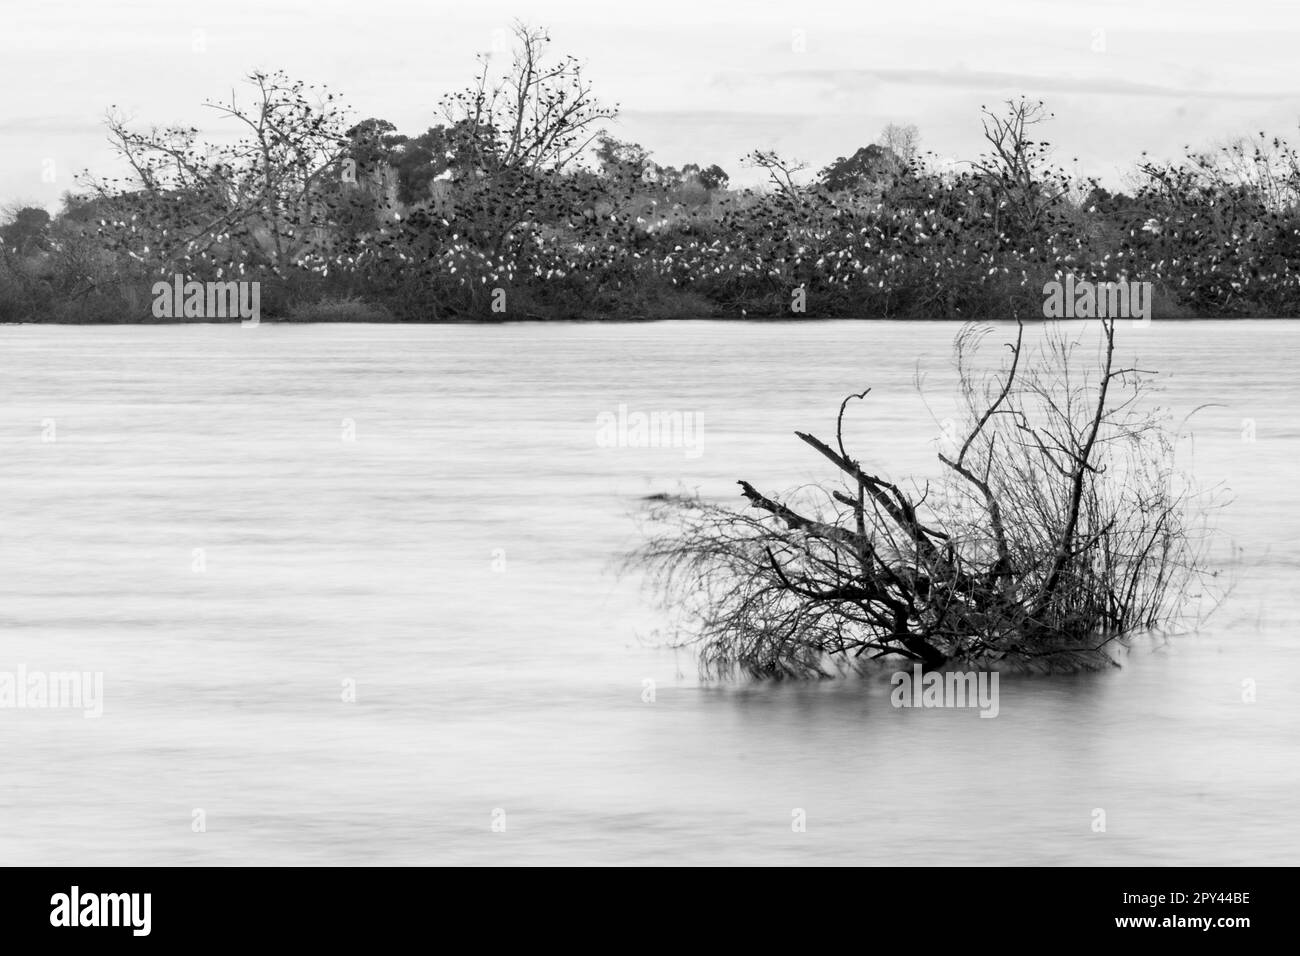 branches of a tree submersed in river water, with island full of birds ...